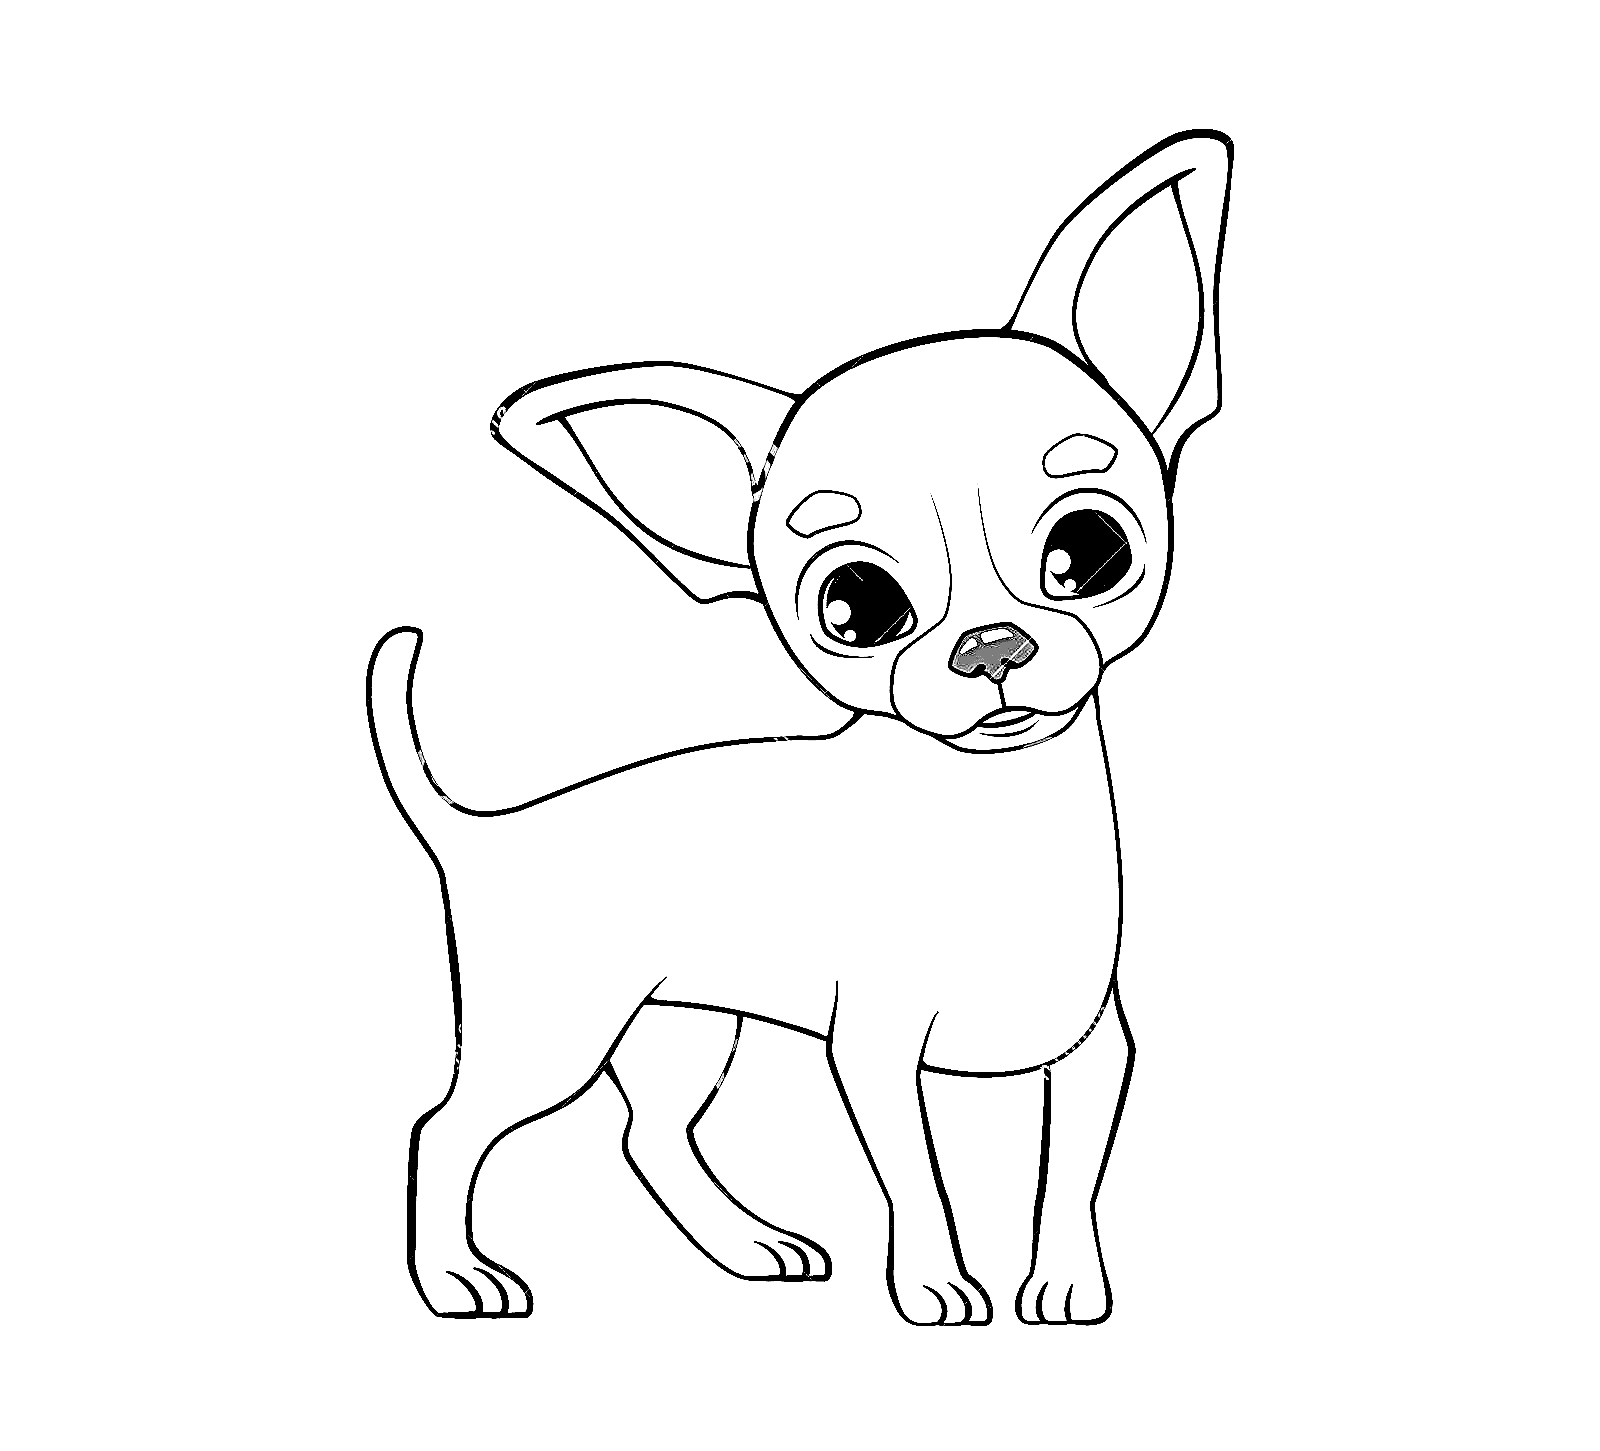 Chihuahua Cute Image Coloring Page